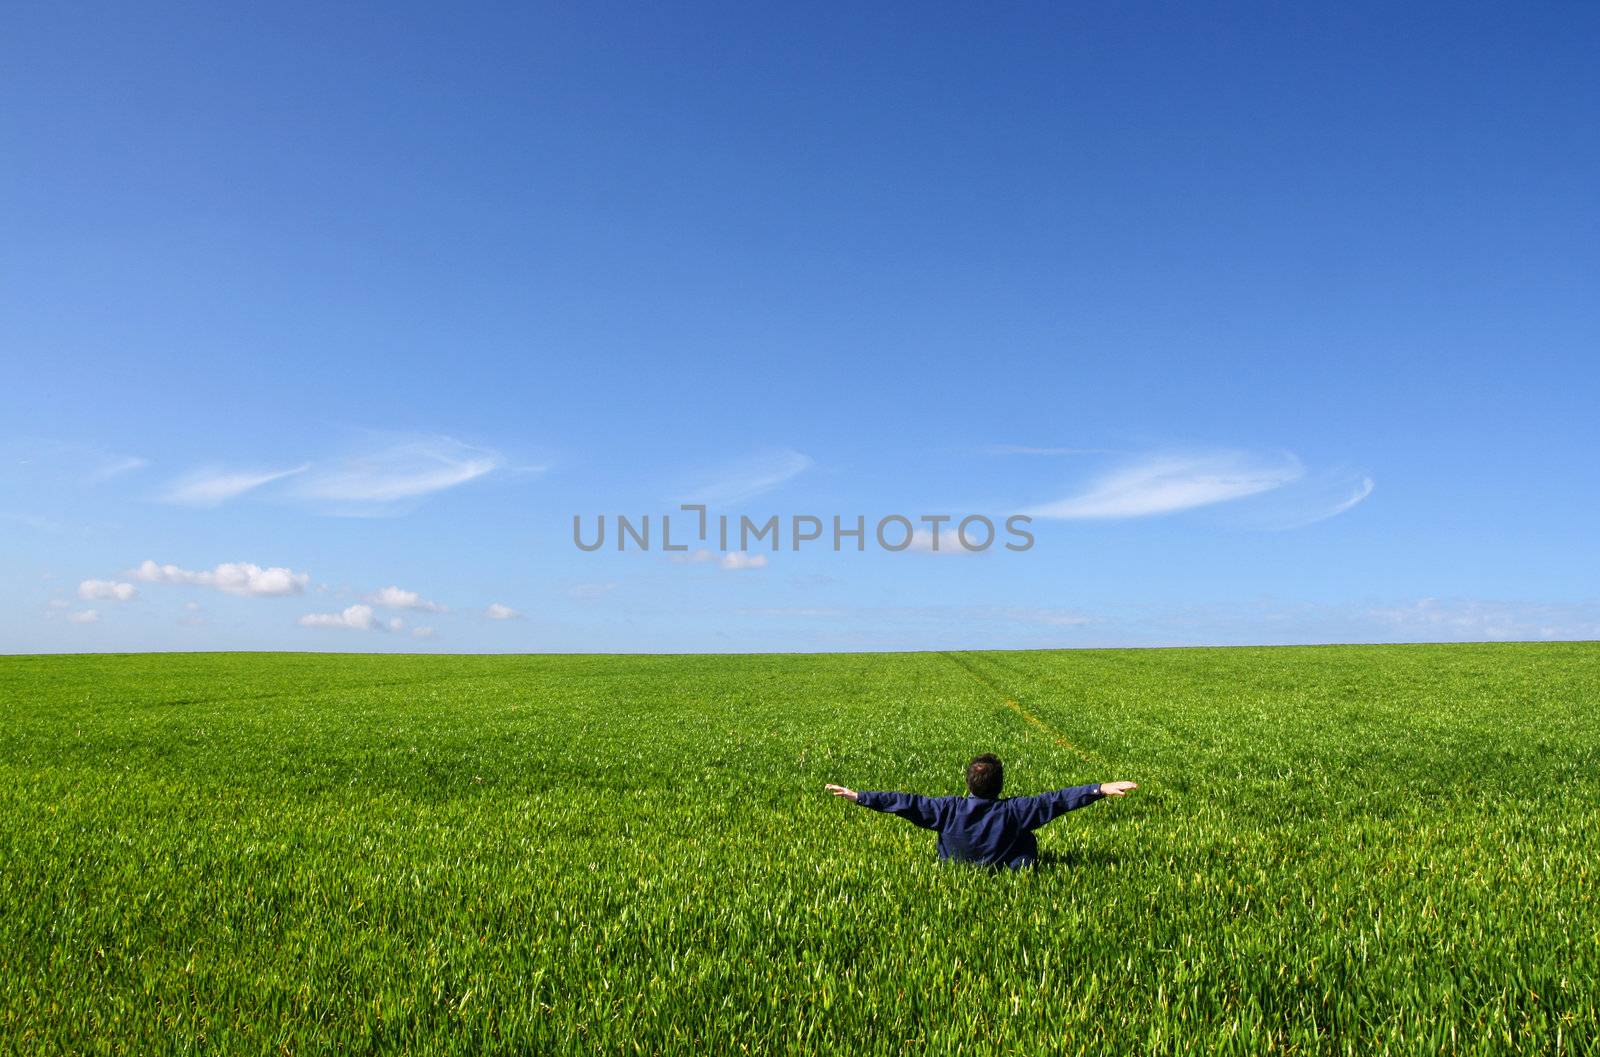 A man sitting alone in a green field, with open arms